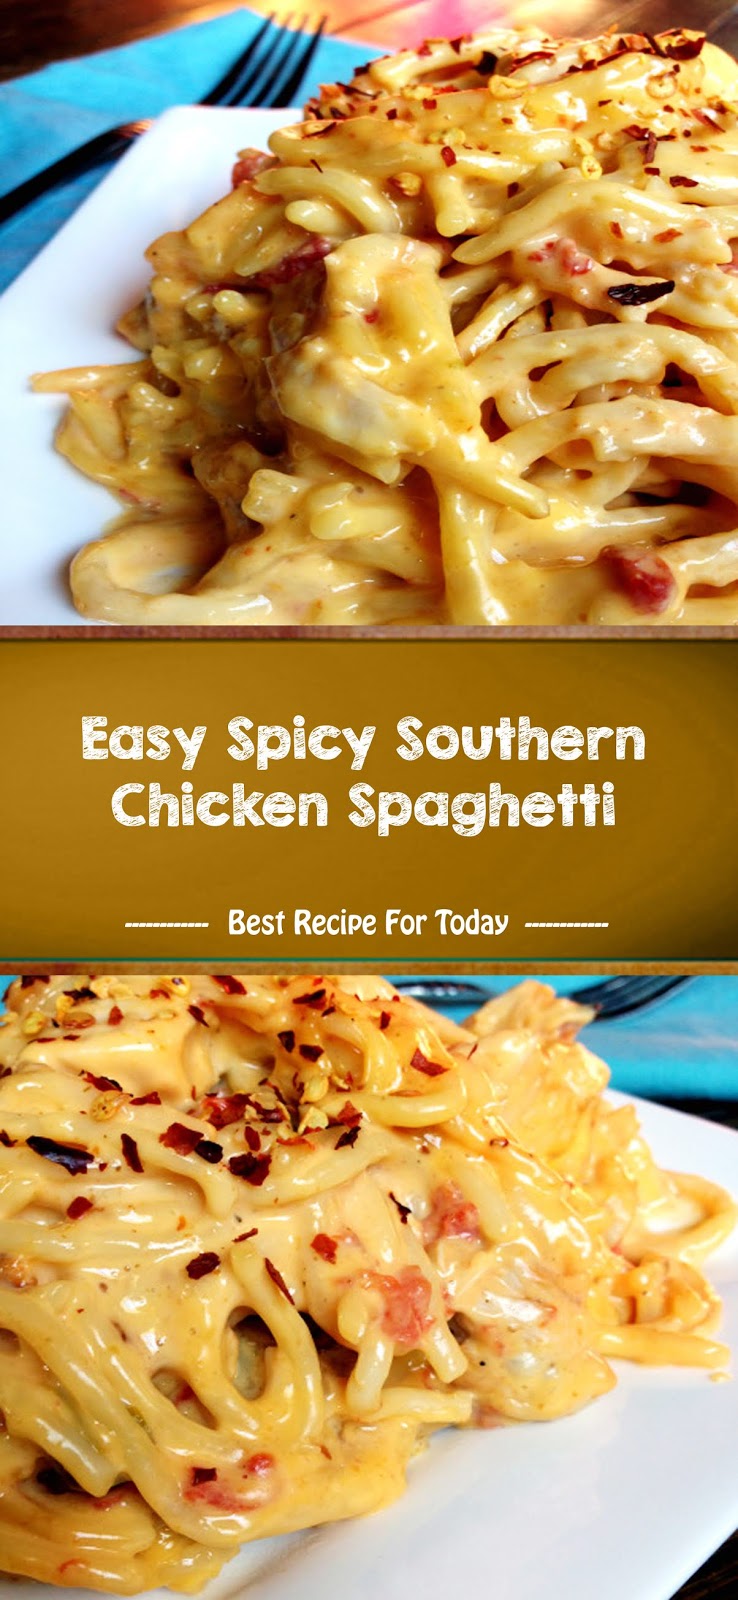 Easy Spicy Southern Chicken Spaghetti